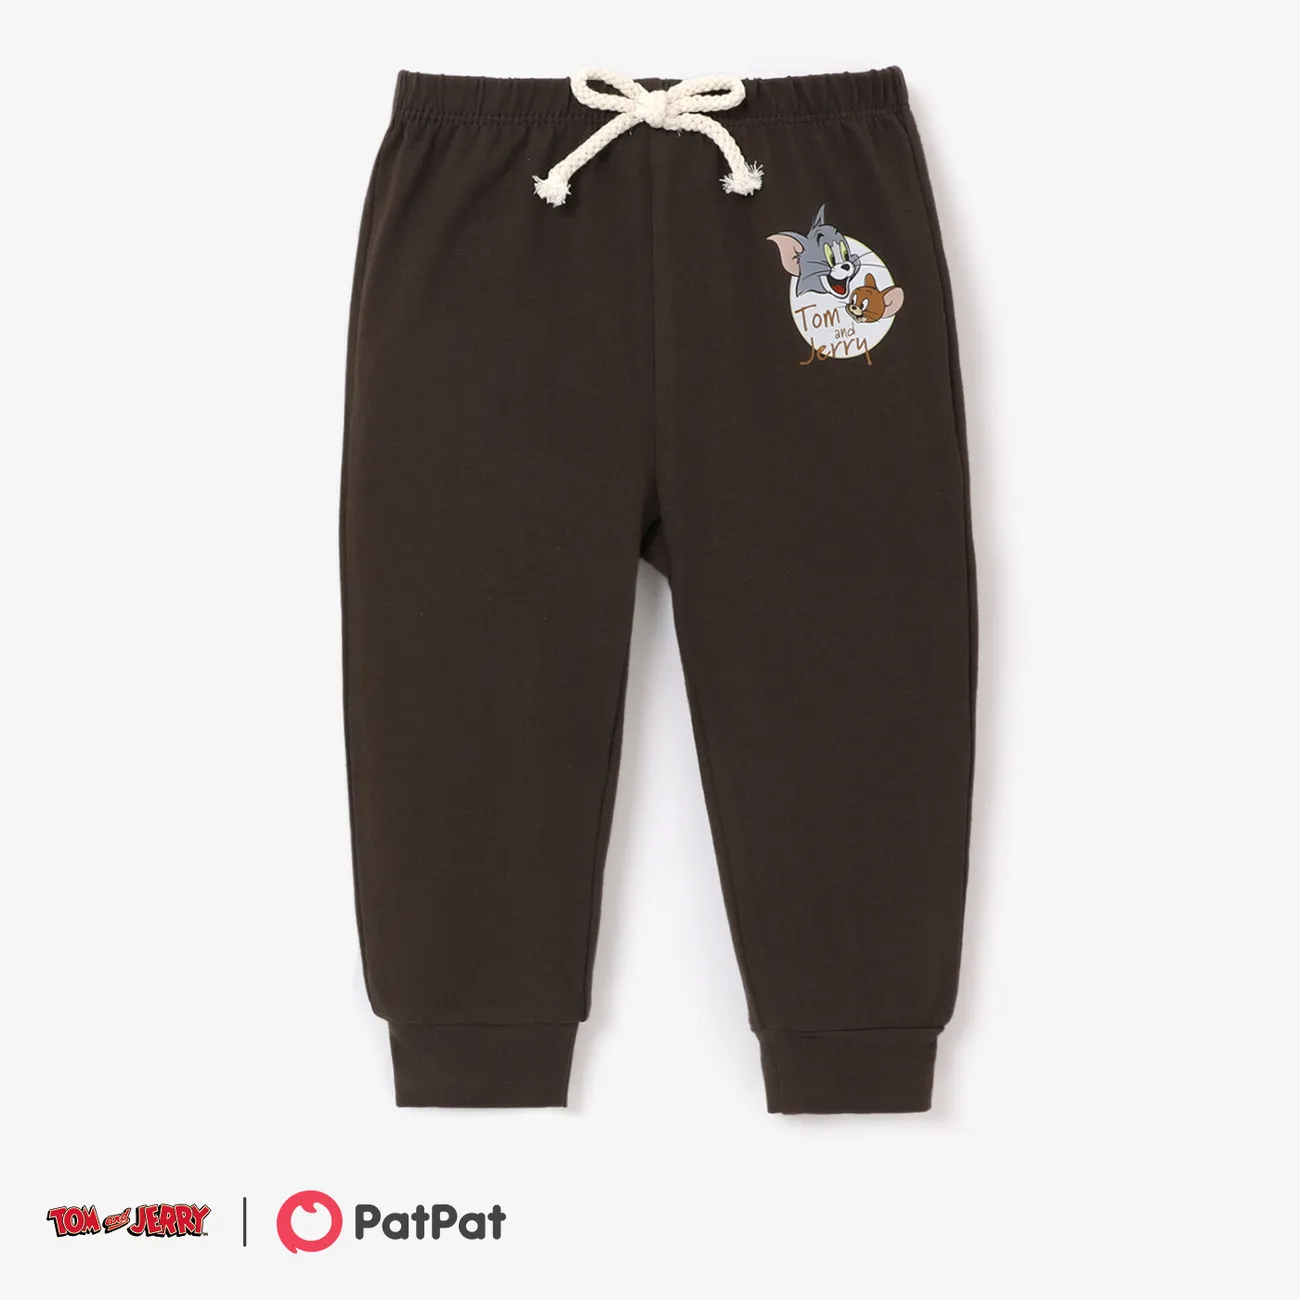 Tom and Jerry baby boy character graphic A romper or a pair of pants to wear with  big image 1